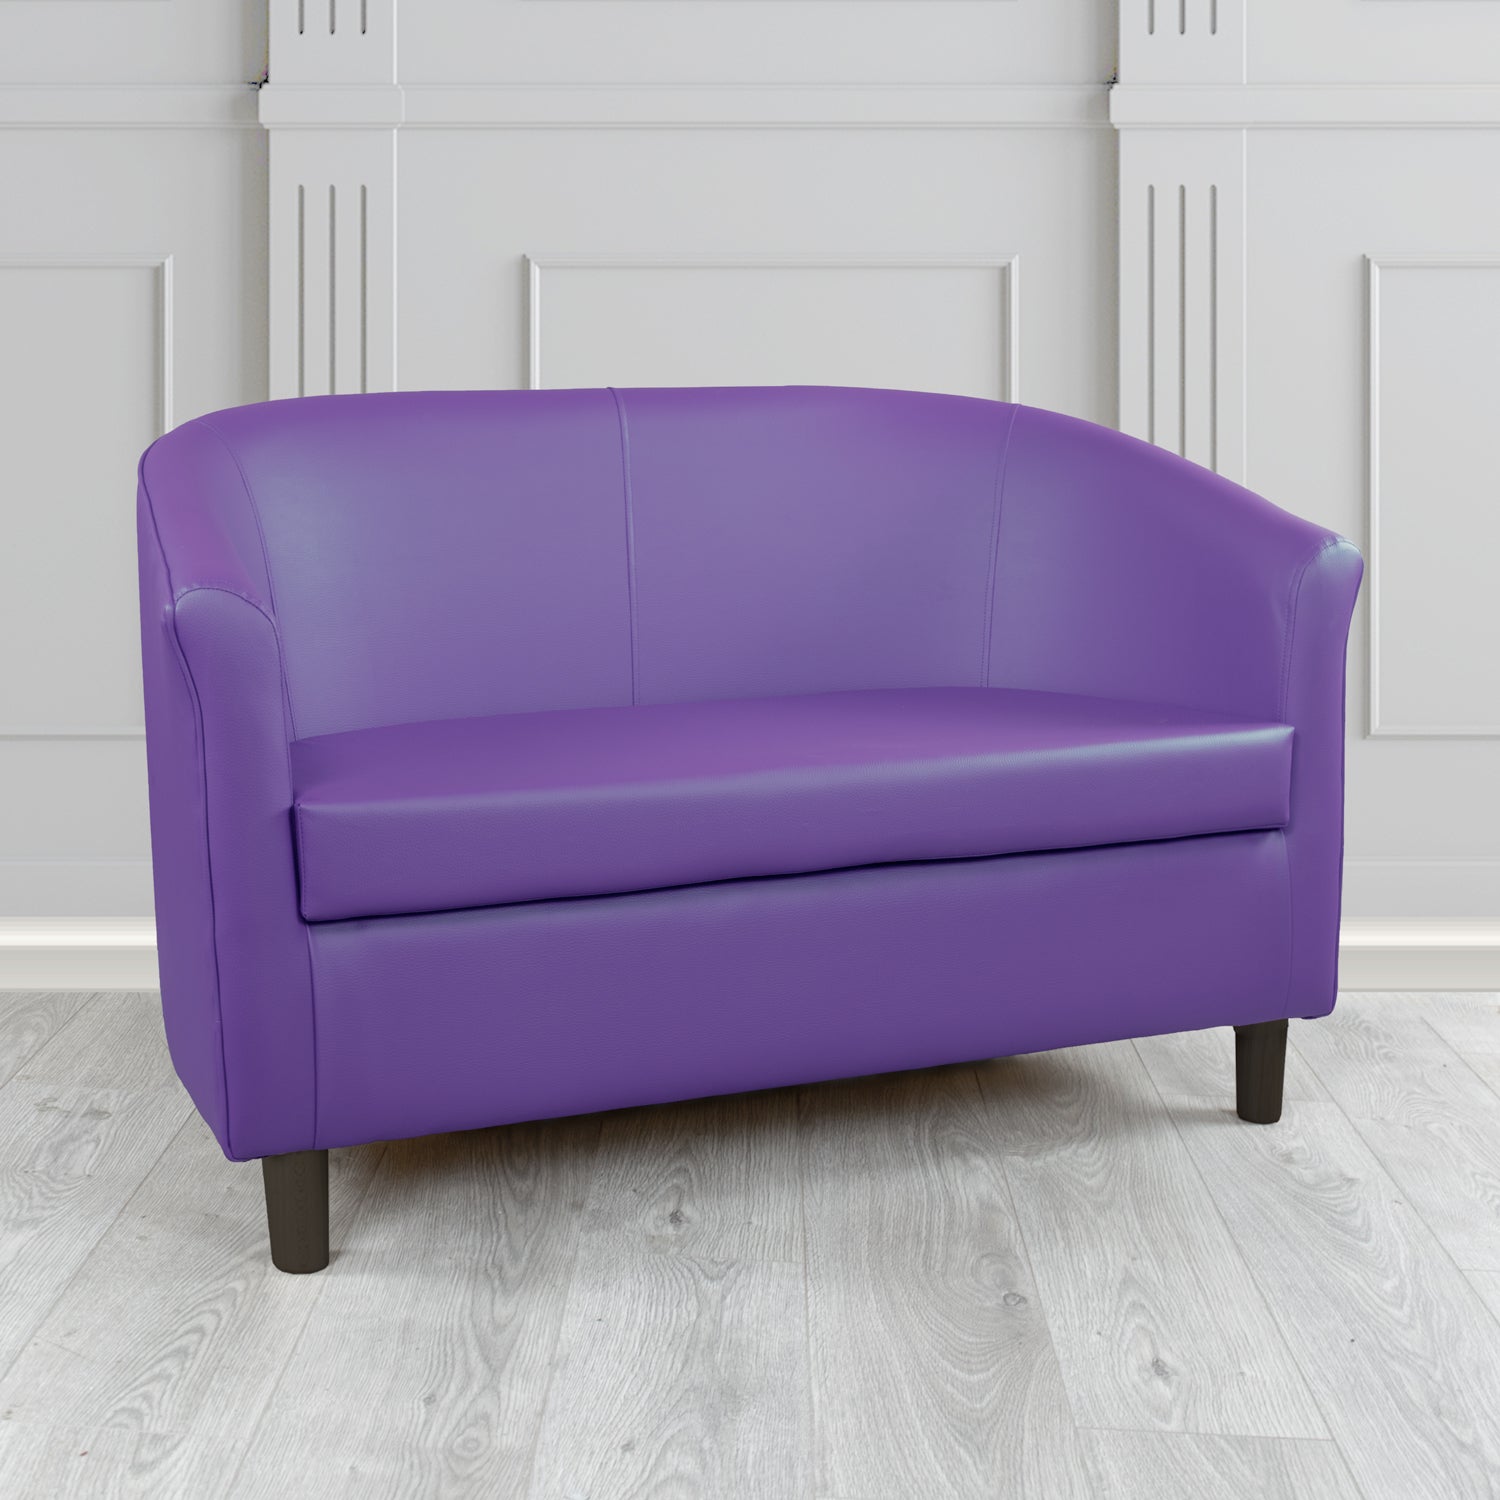 Tuscany Just Colour Ultraviolet Crib 5 Faux Leather 2 Seater Tub Sofa - The Tub Chair Shop